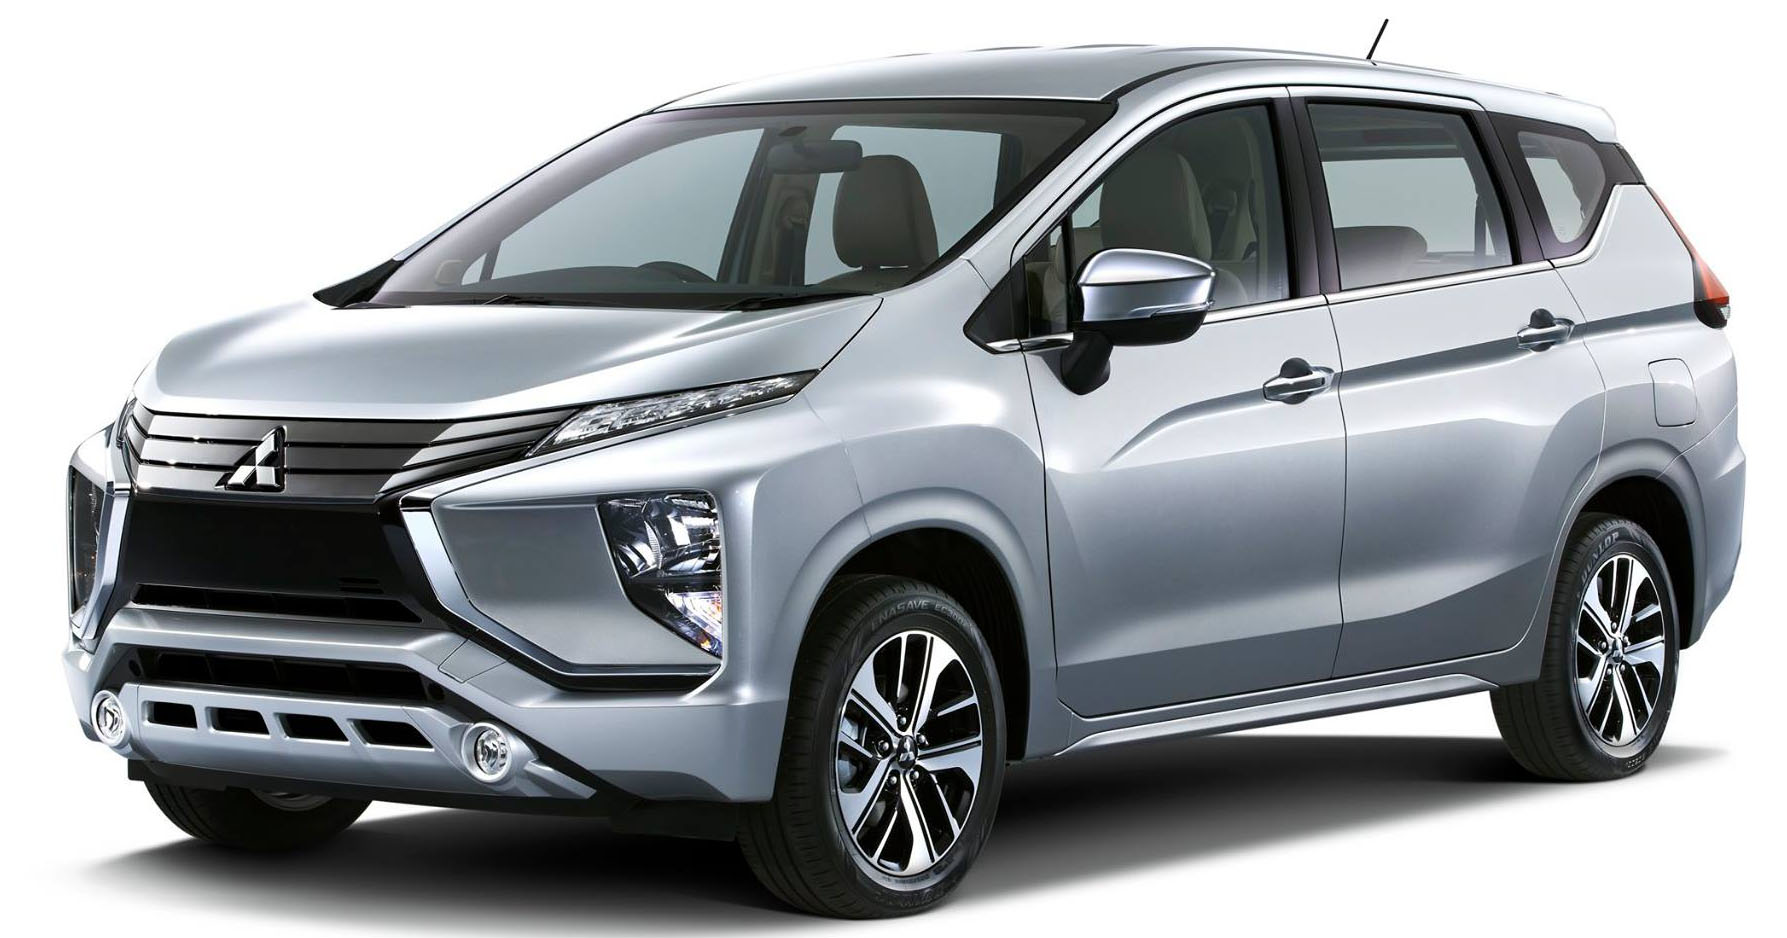 News Mitsubishi Expander  Revealed MPVs And Crossovers 